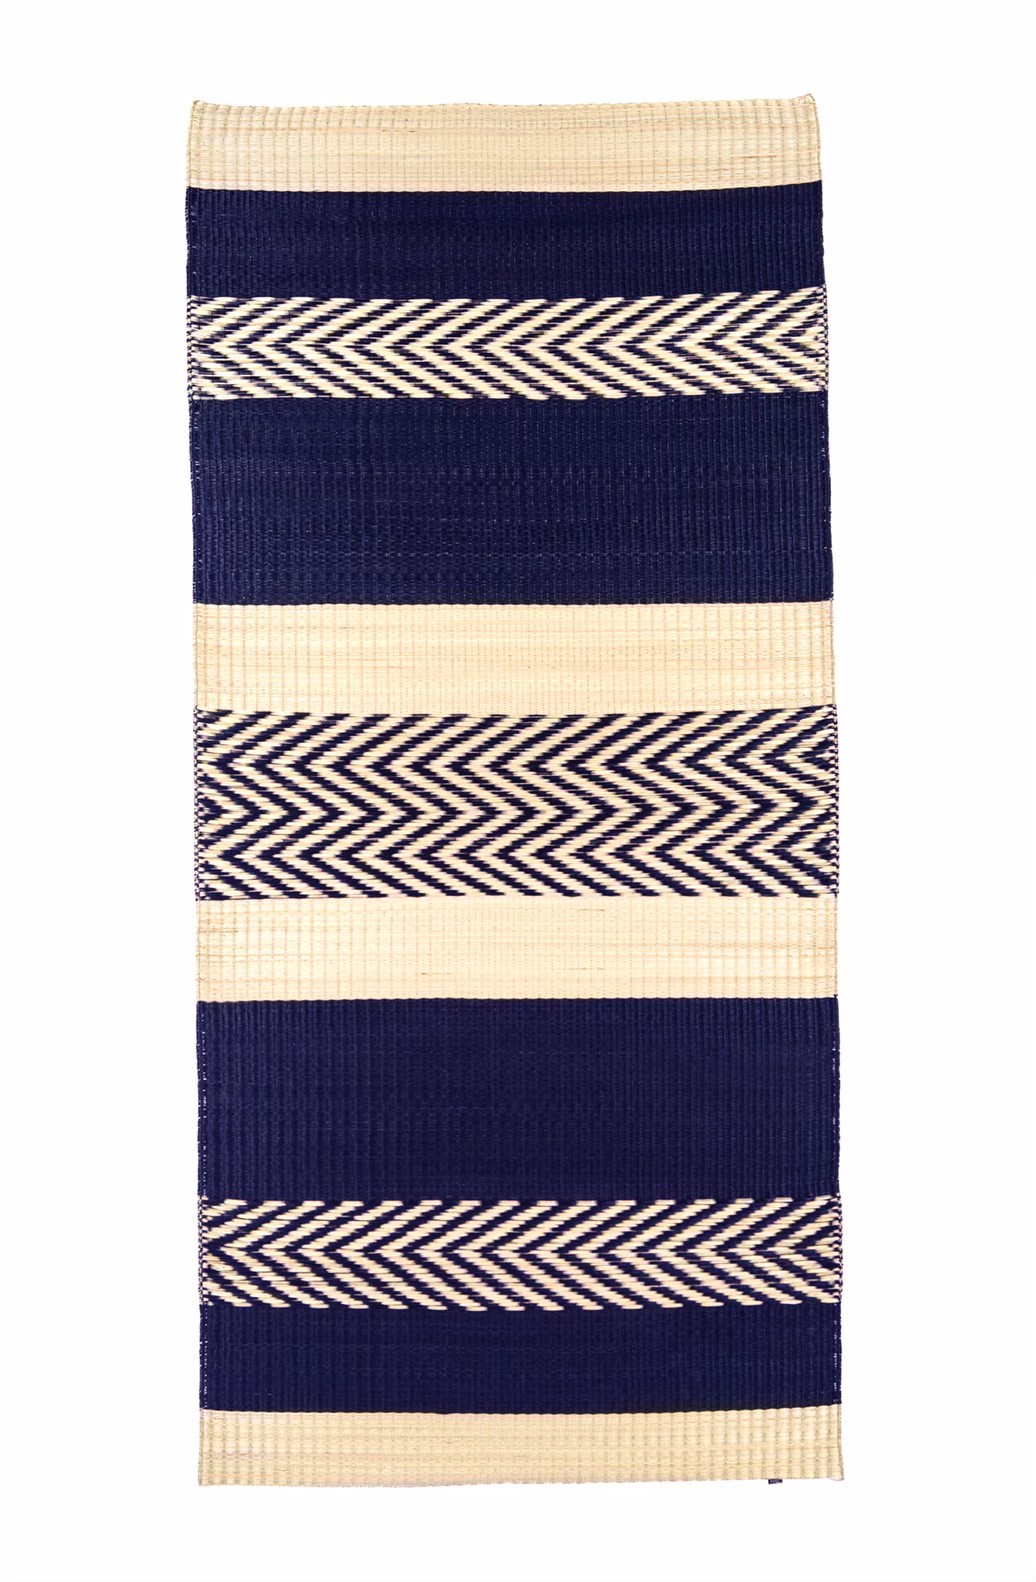  Promotion mother's day Maxi Stripe mat Navy Blue 2 ชิ้น